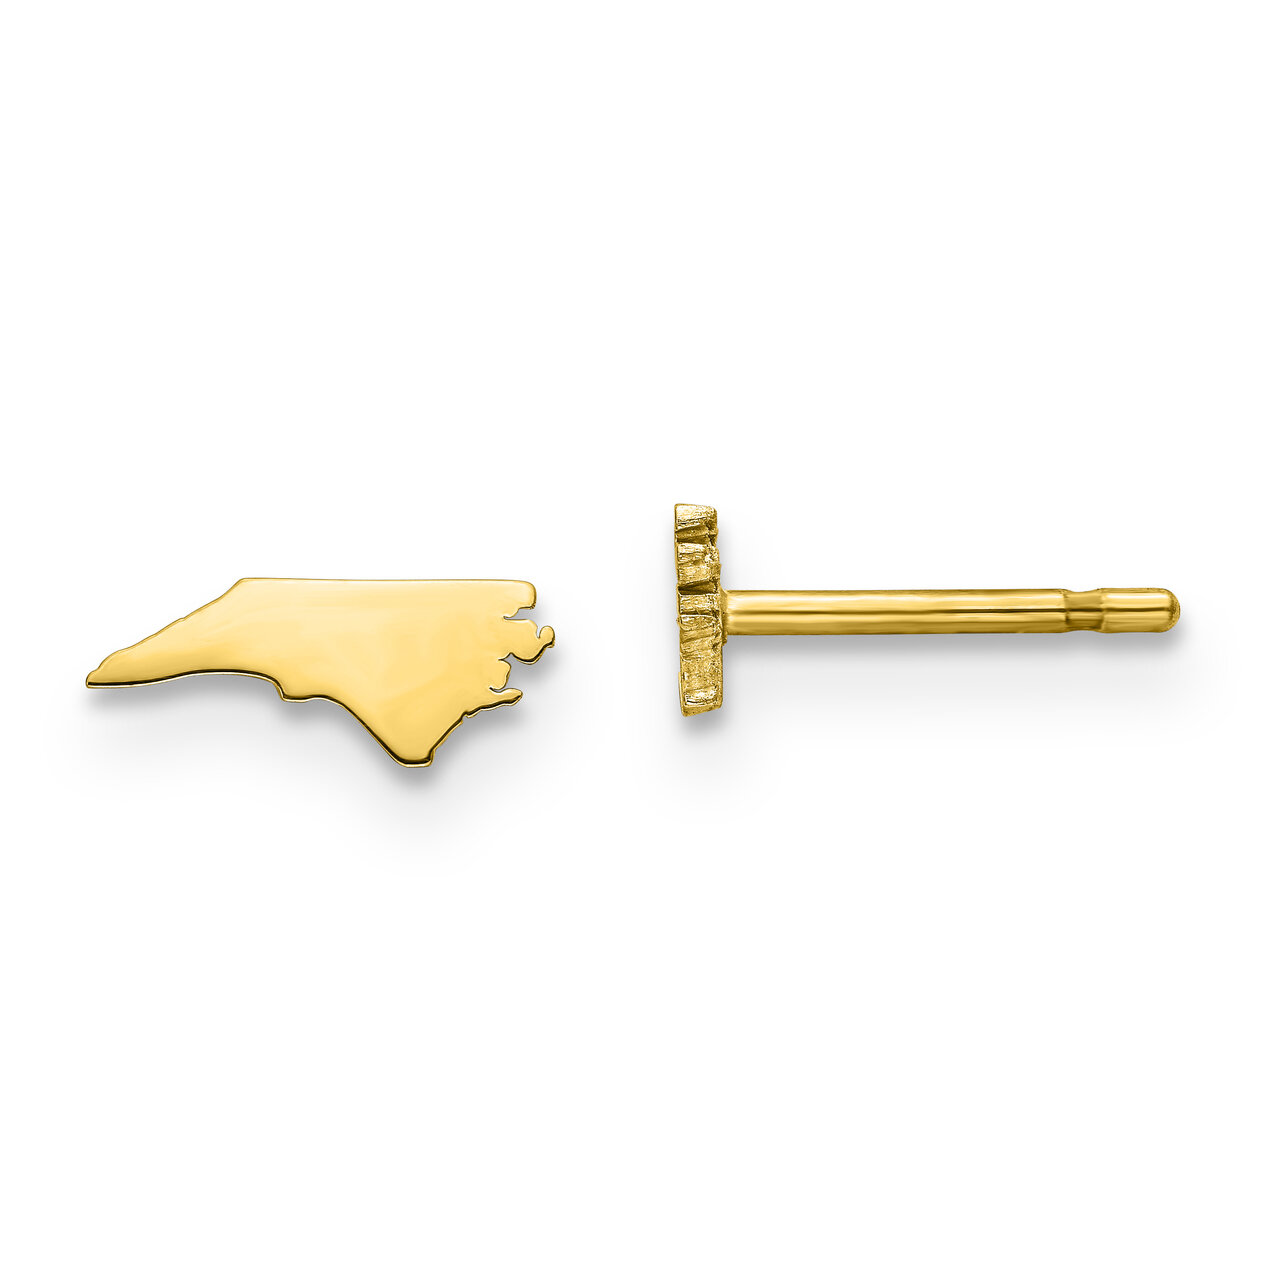 North Carolina State Small Earrings Gold-plated on Silver Engravable XNE50GP-NC